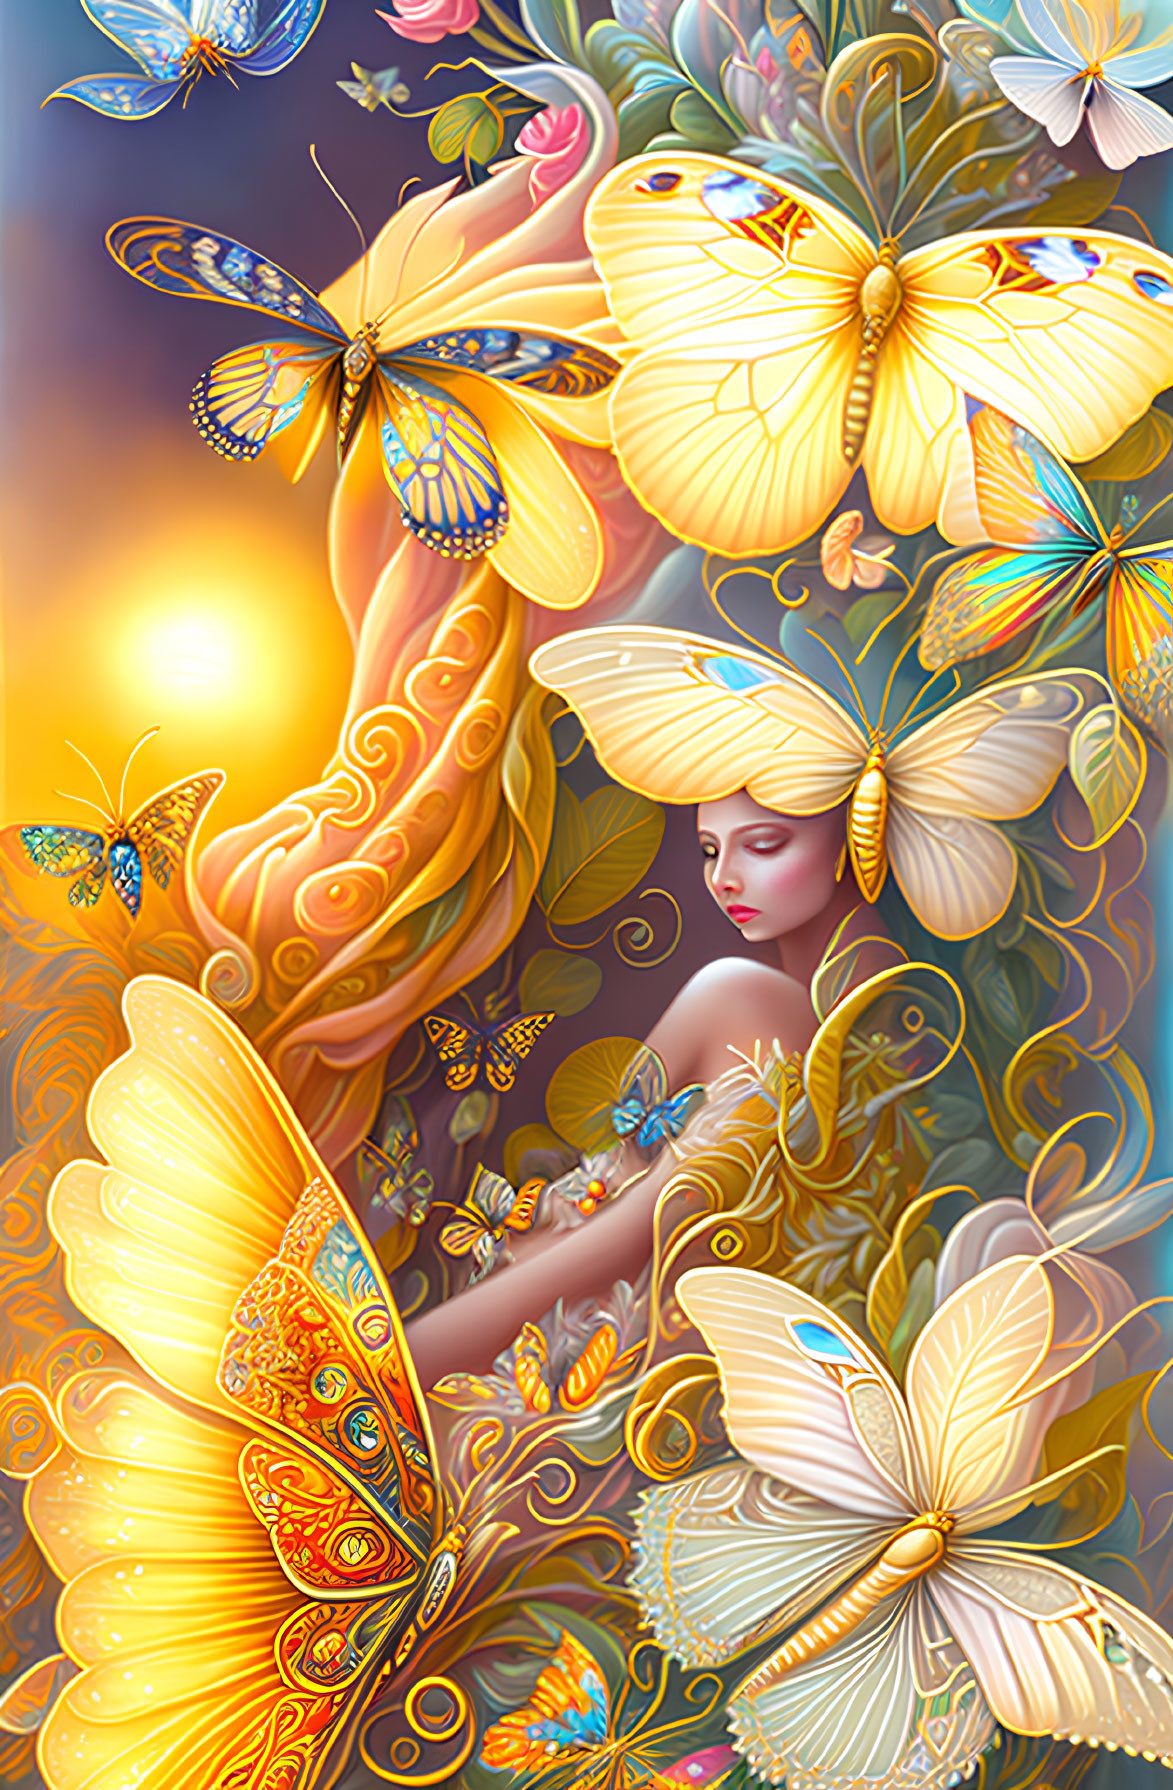 Colorful Butterfly Artwork Featuring Woman in Surreal Setting